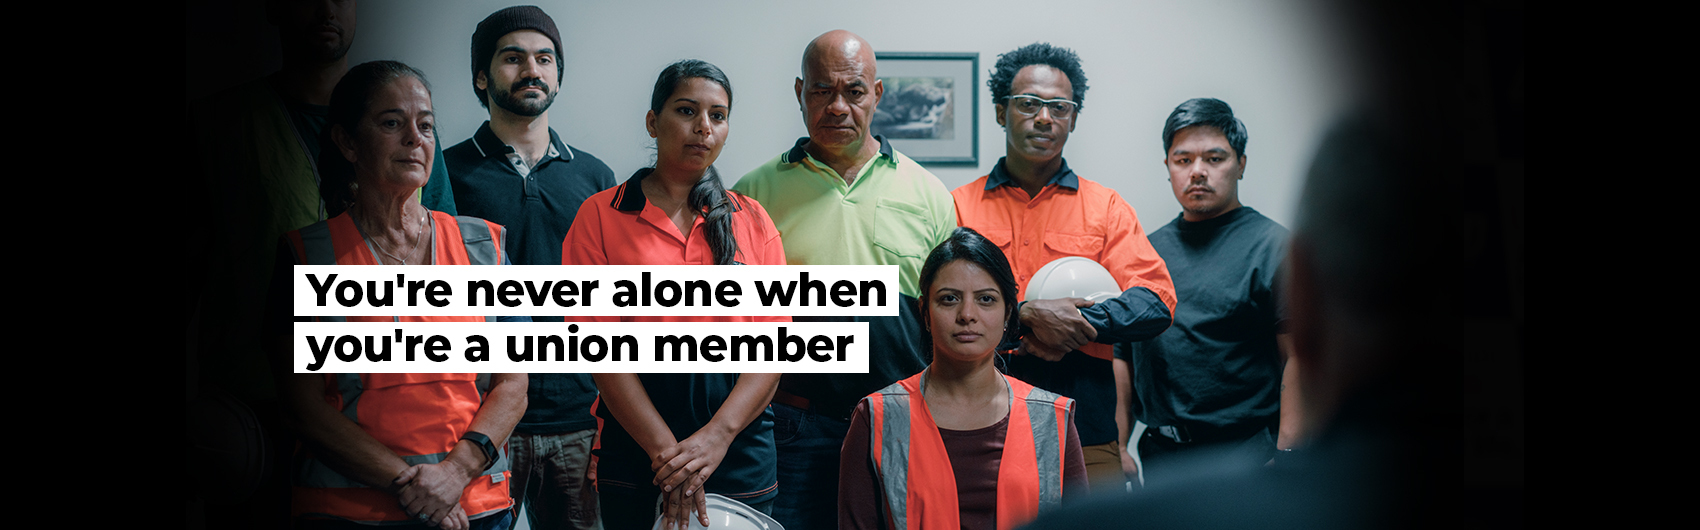 You're never alone when you're a union member